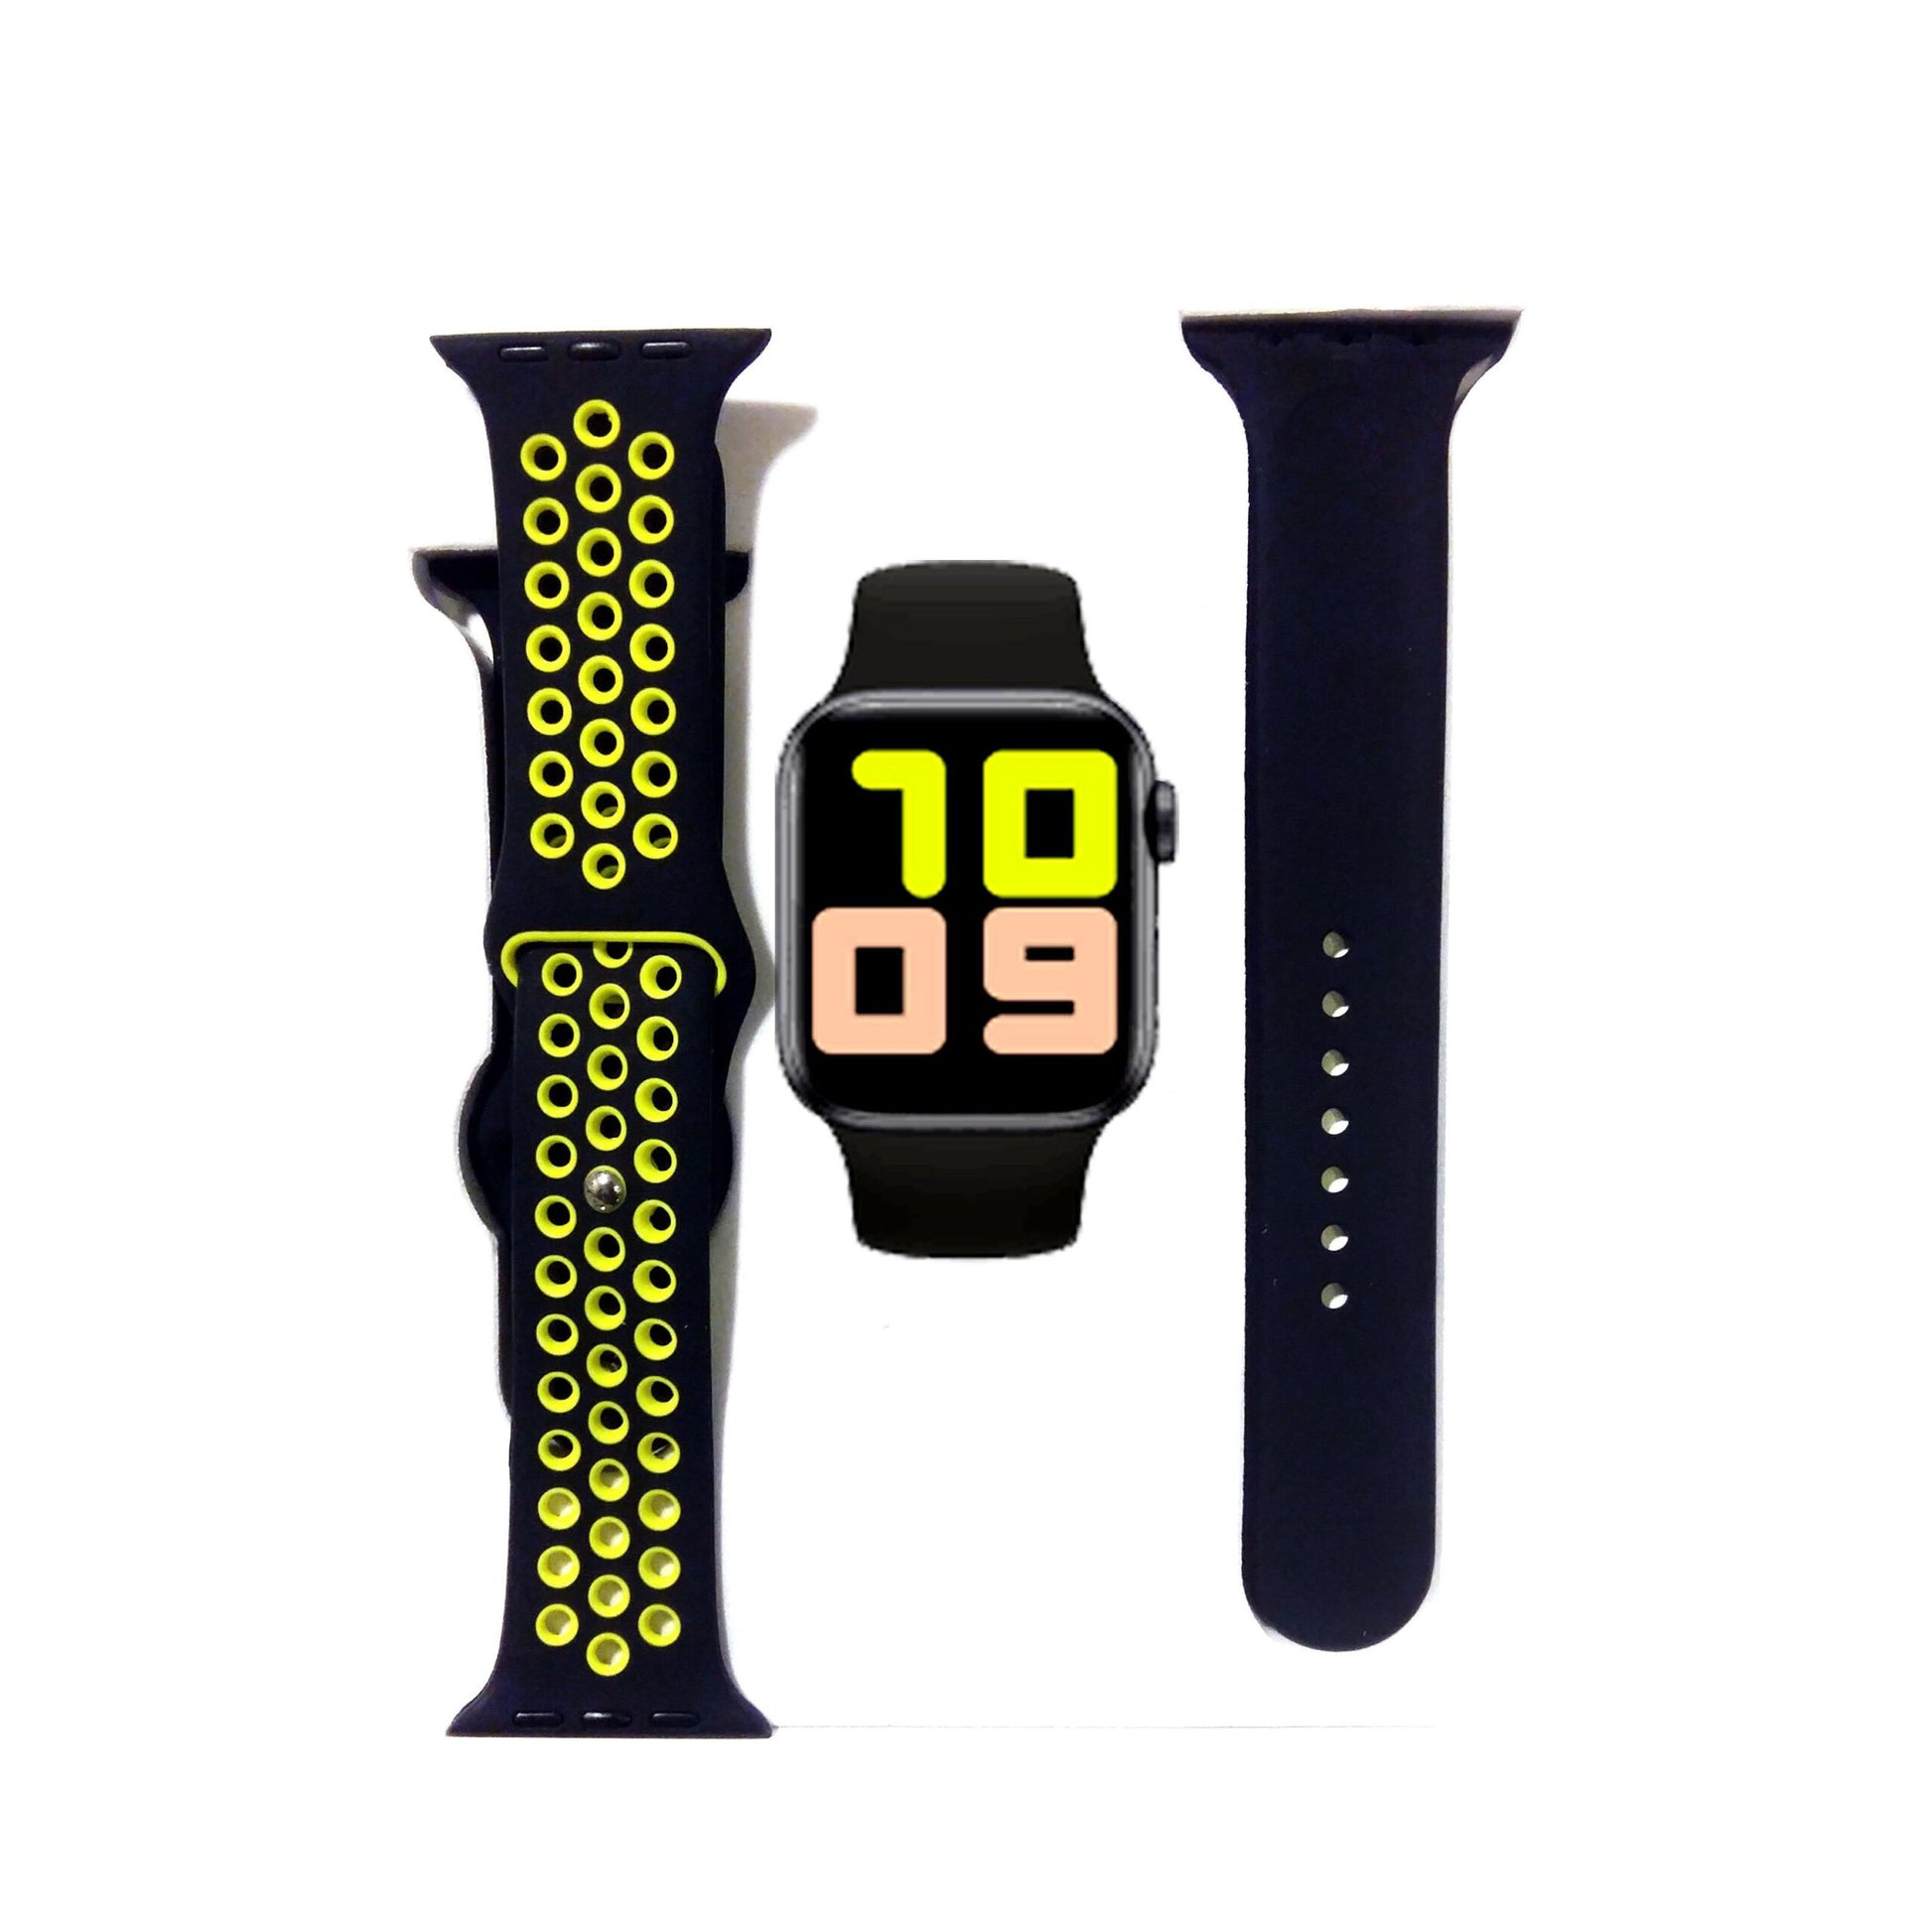 T500 Plus Smart Watch for Call Heart Rate IWO 8 Lite for Android & ISO - T500 Plus